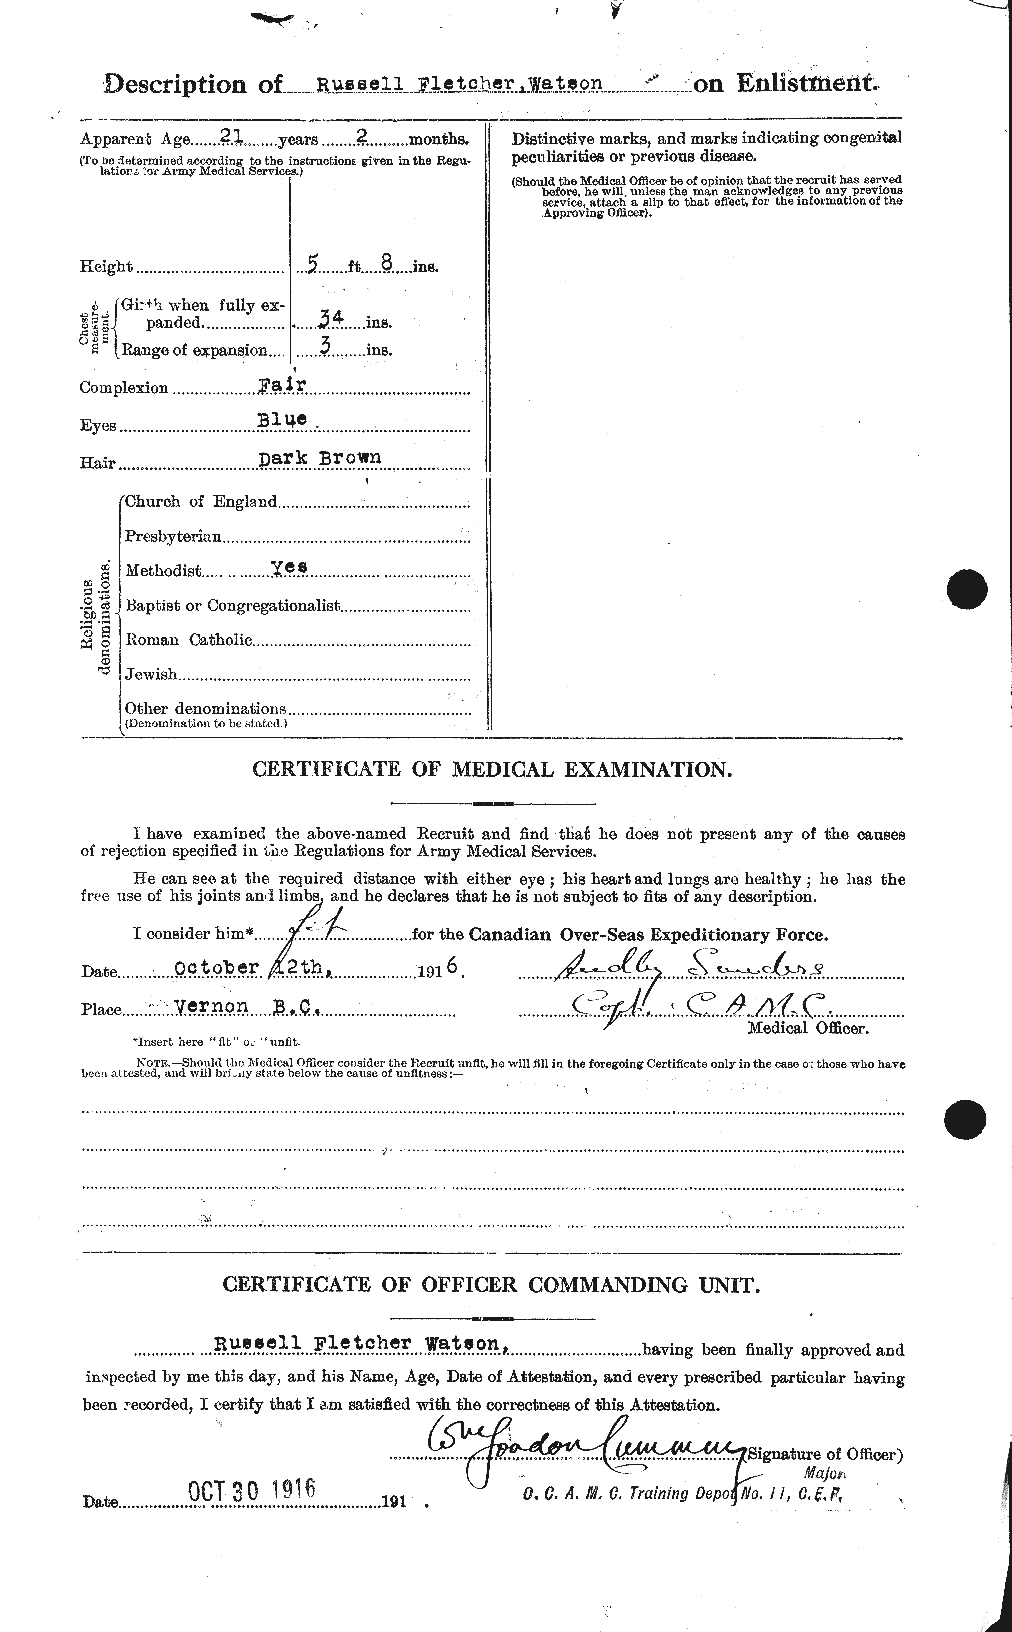 Personnel Records of the First World War - CEF 661268b